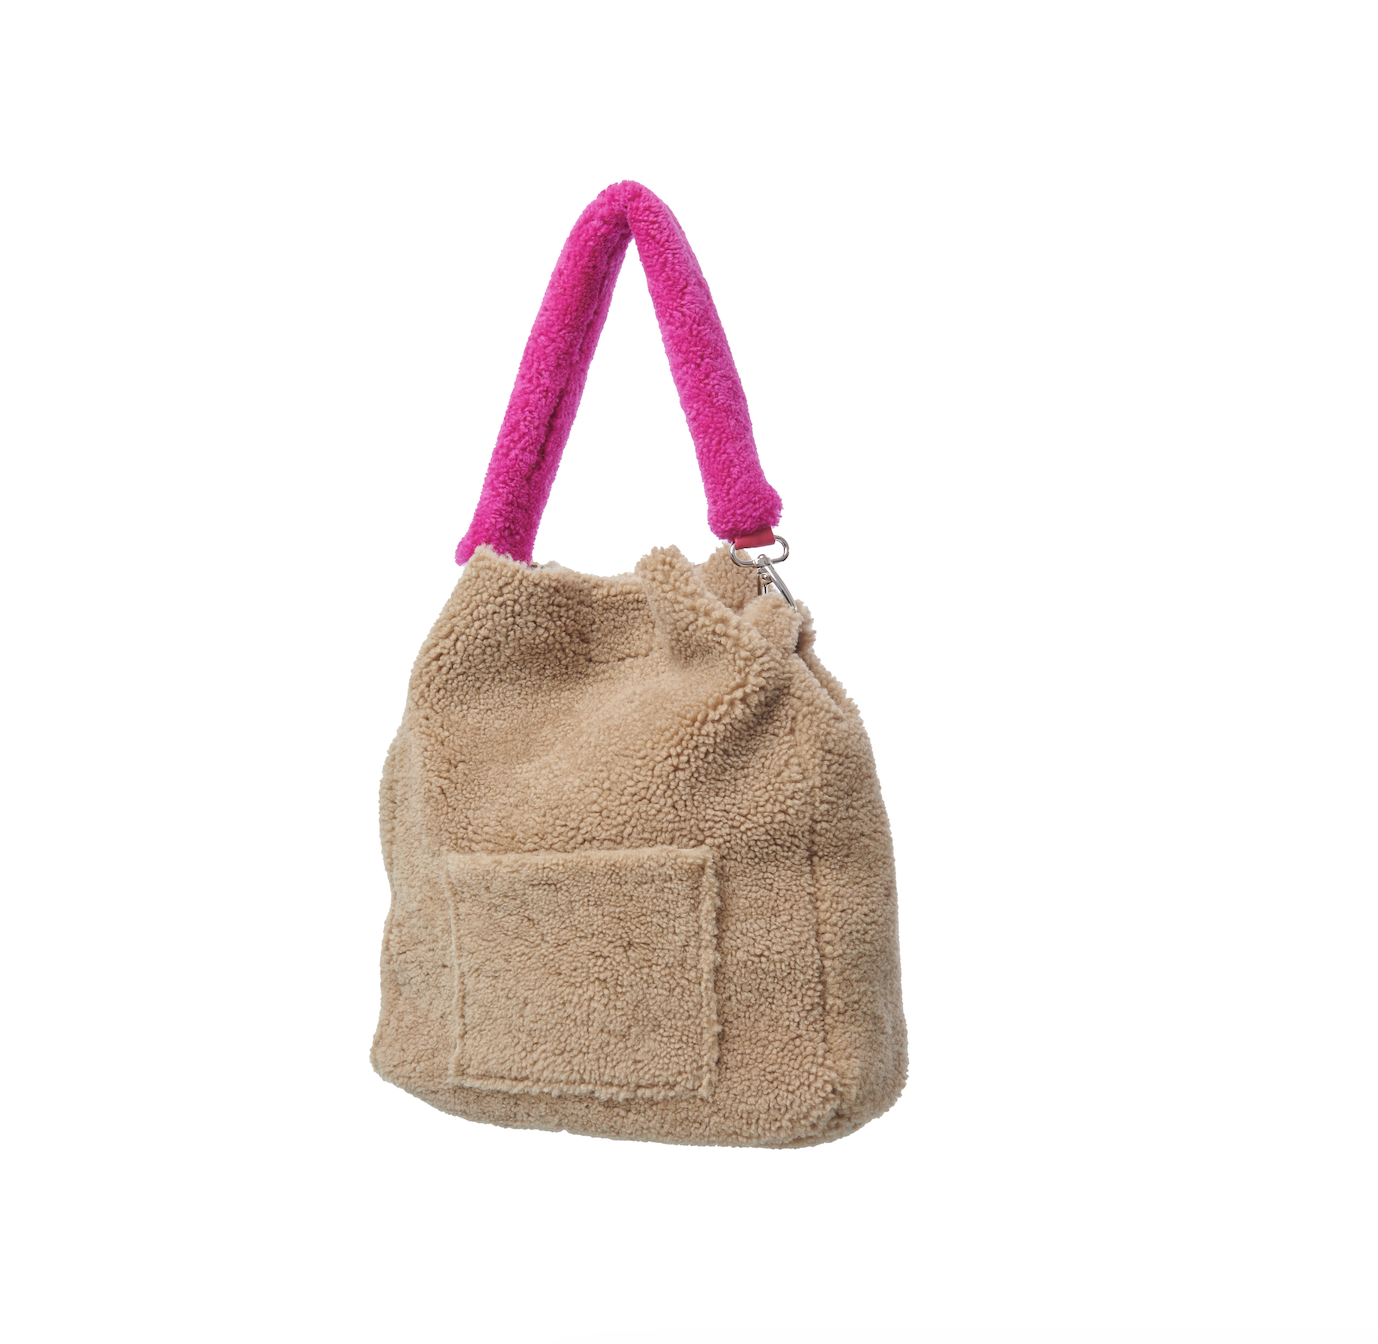 Cosy Shopper - Honey with Cosy Strap Pink